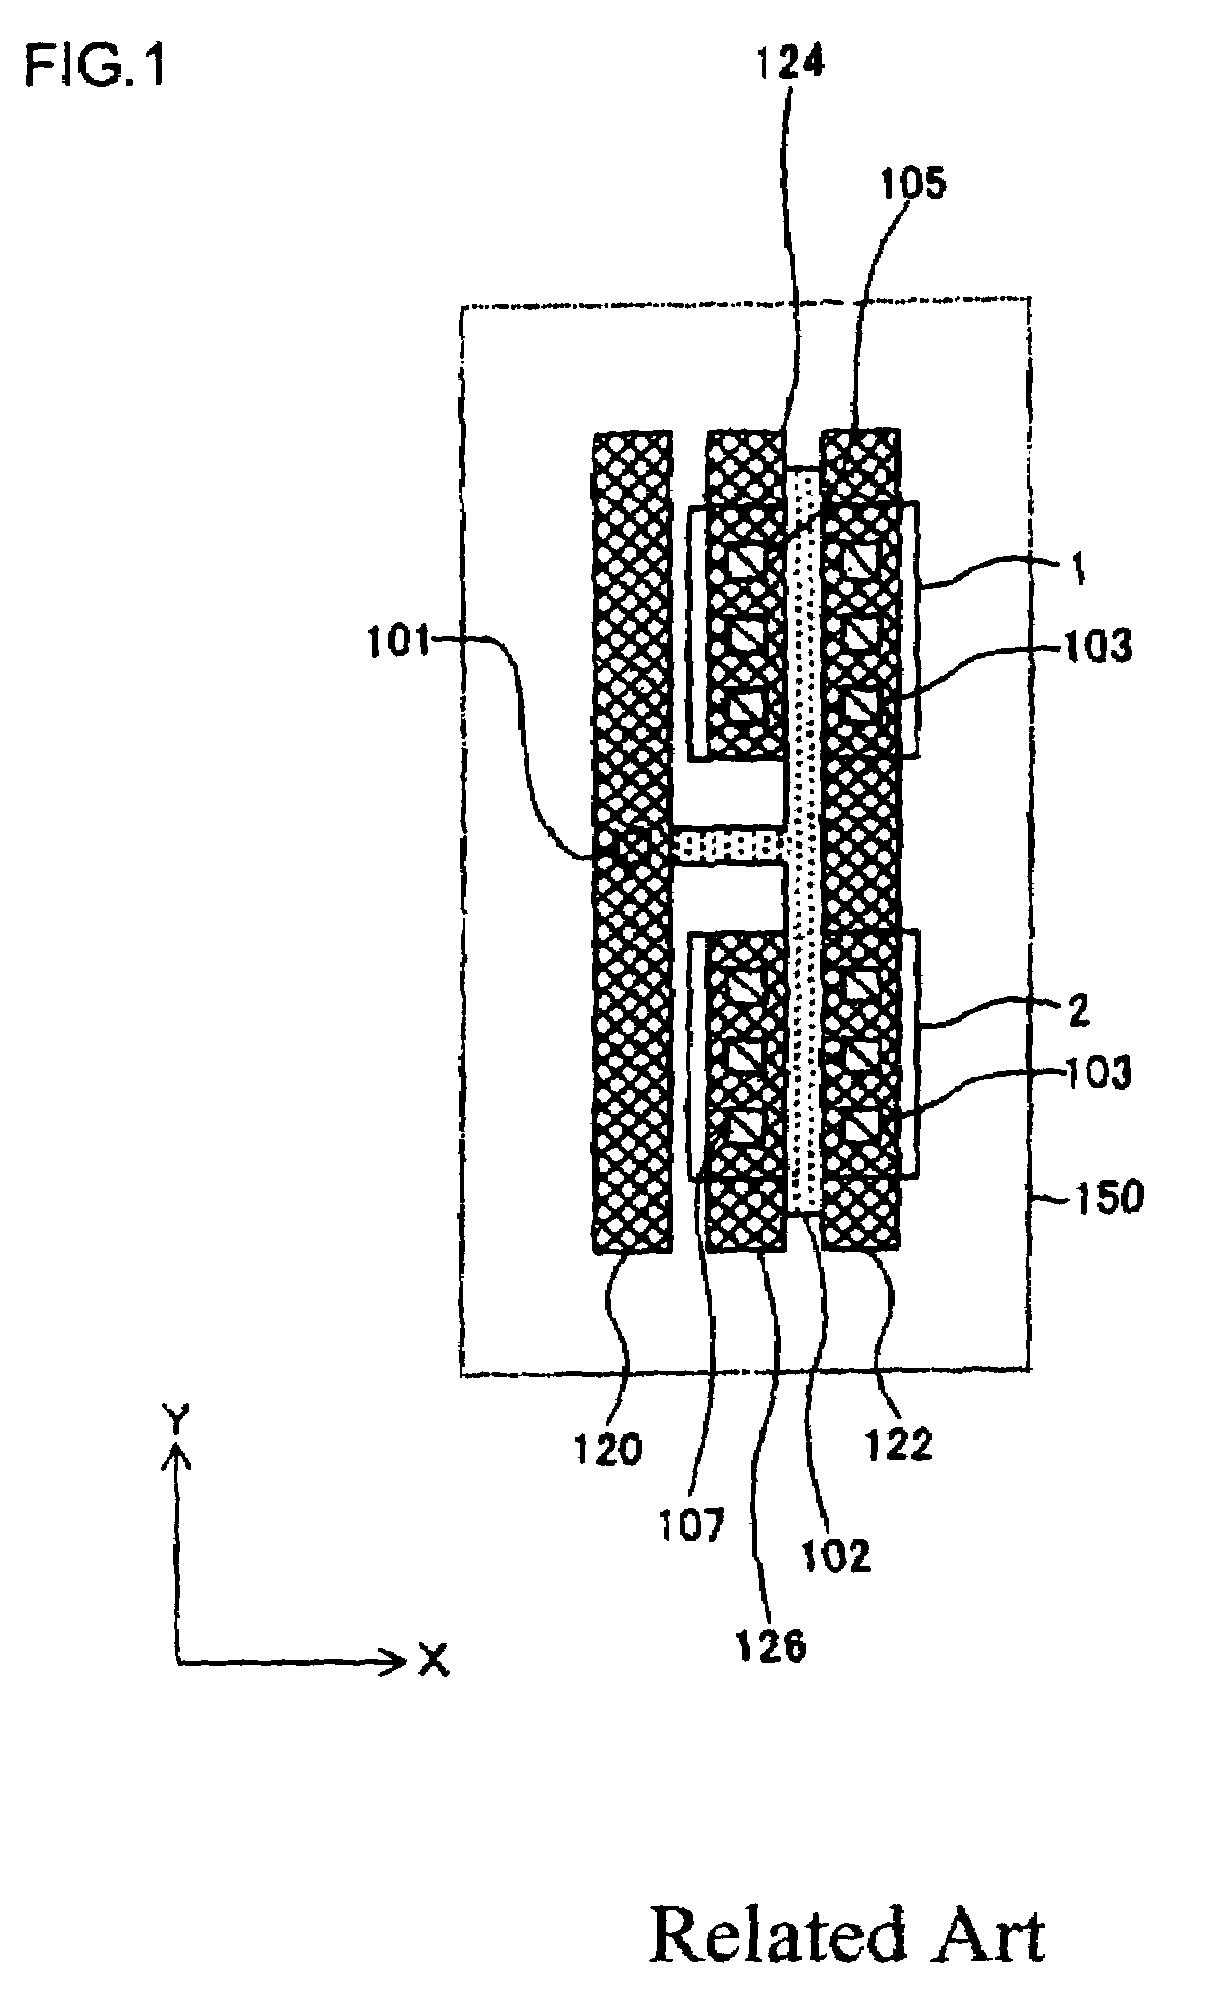 Basic cell design method for reducing the resistance of connection wiring between logic gates